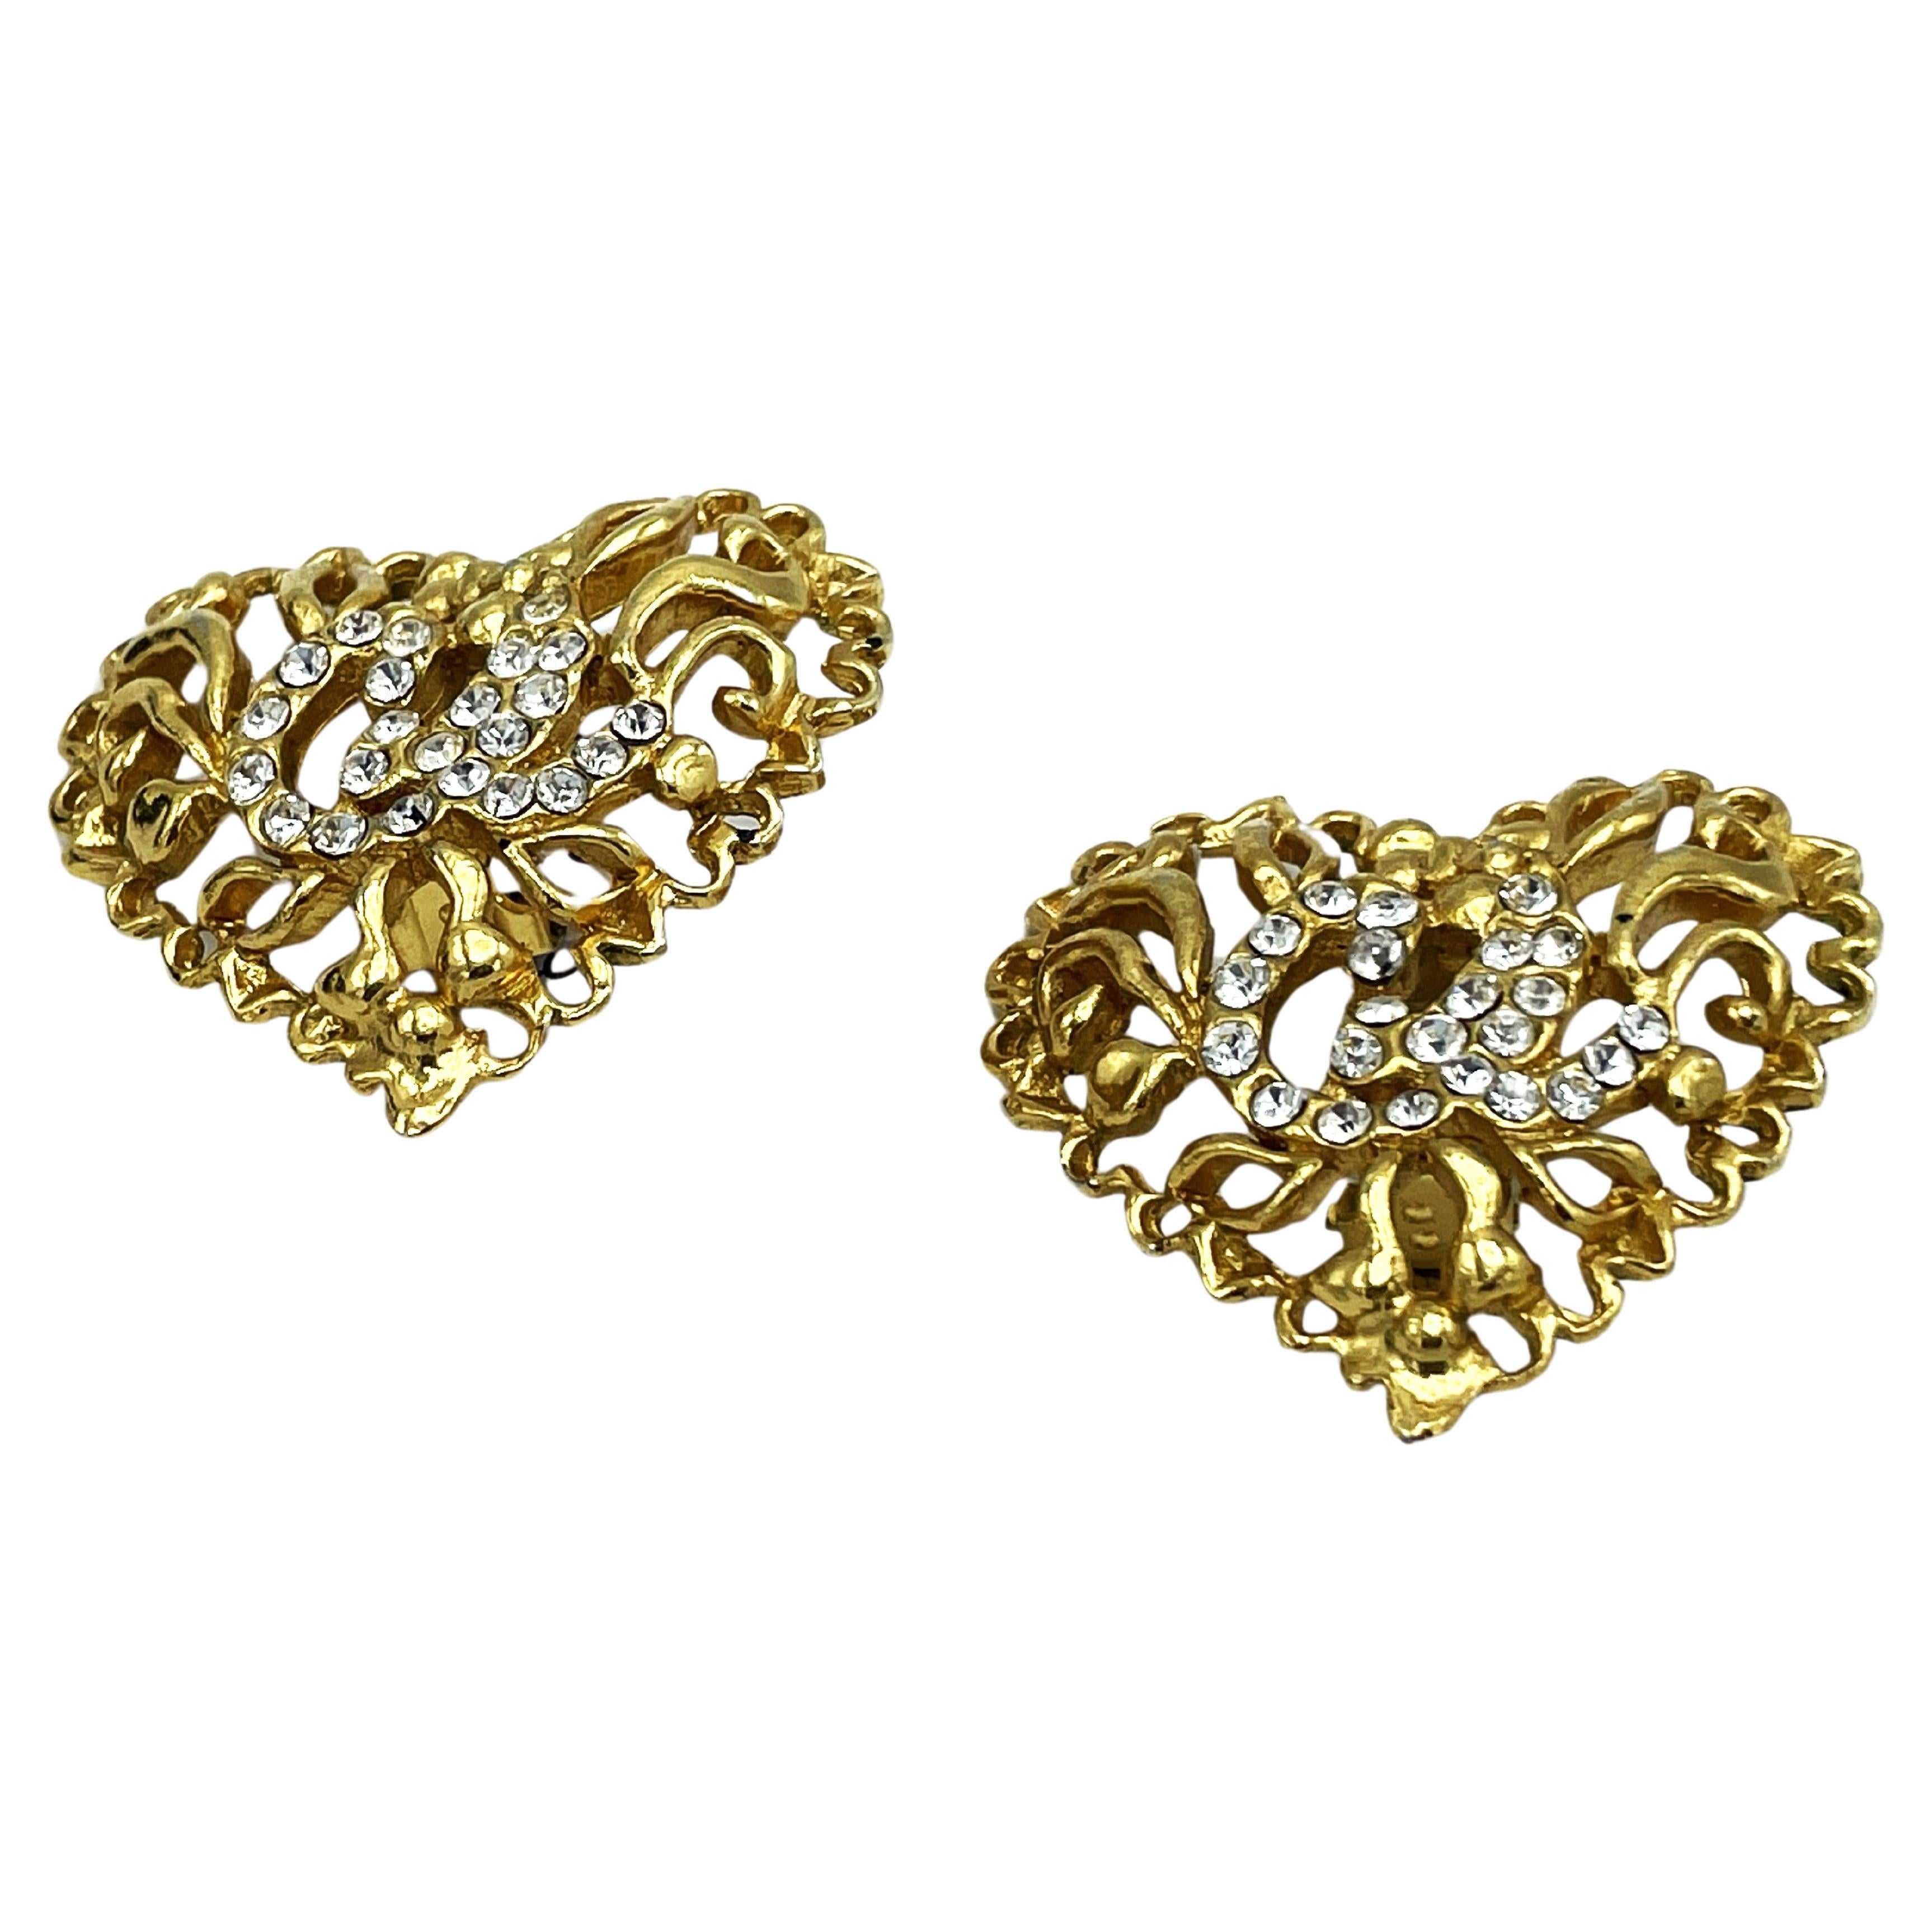 CLIP-ON EARRING by Christian Lacroix Paris, openwork heart, gold-plated, E 95 In Excellent Condition For Sale In Stuttgart, DE